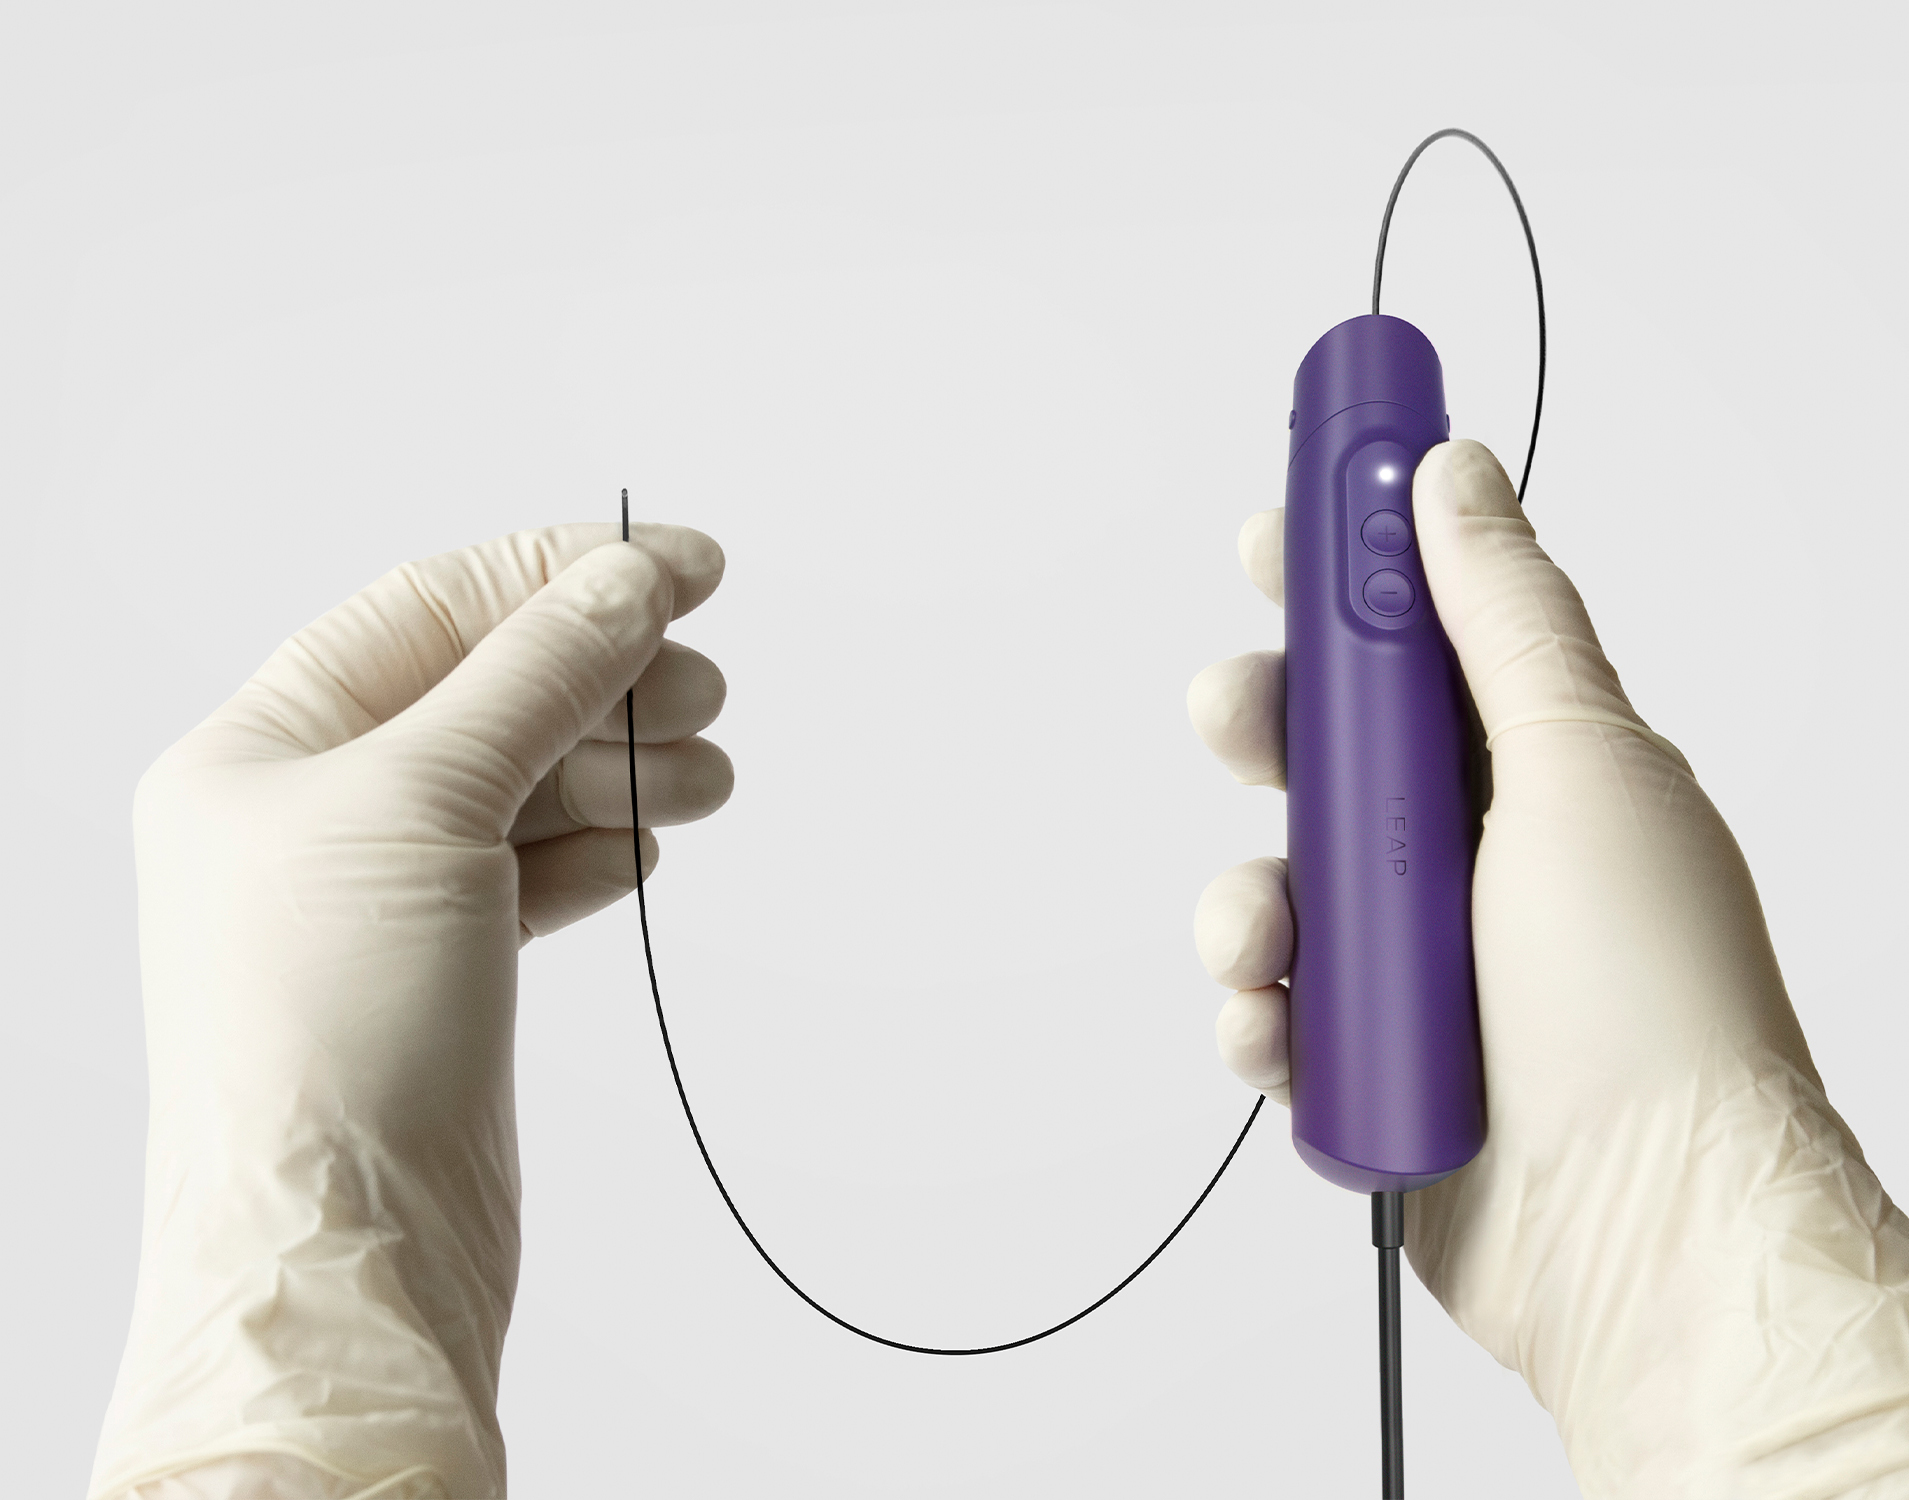 LEAP low cost endoscope